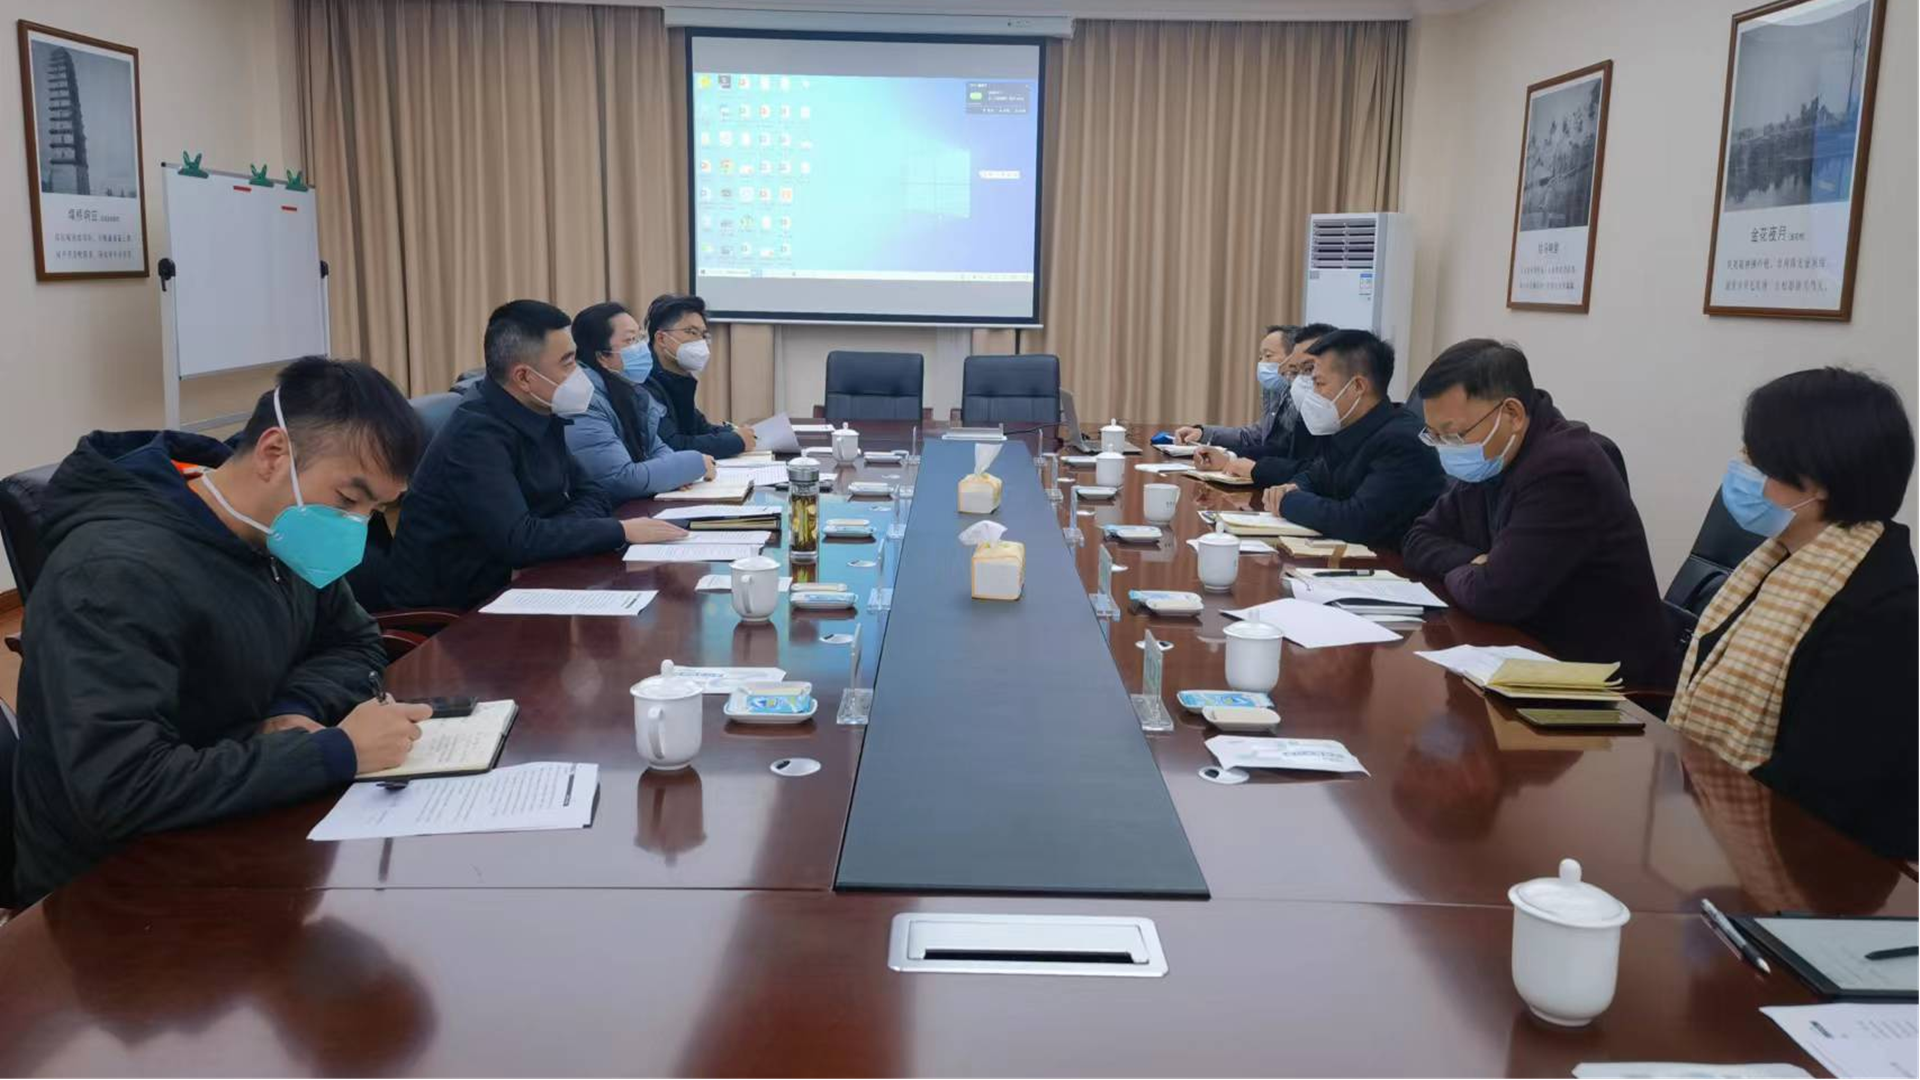 Group Leaders Led a Team to Shuangliu District Committee for Report and Exchange